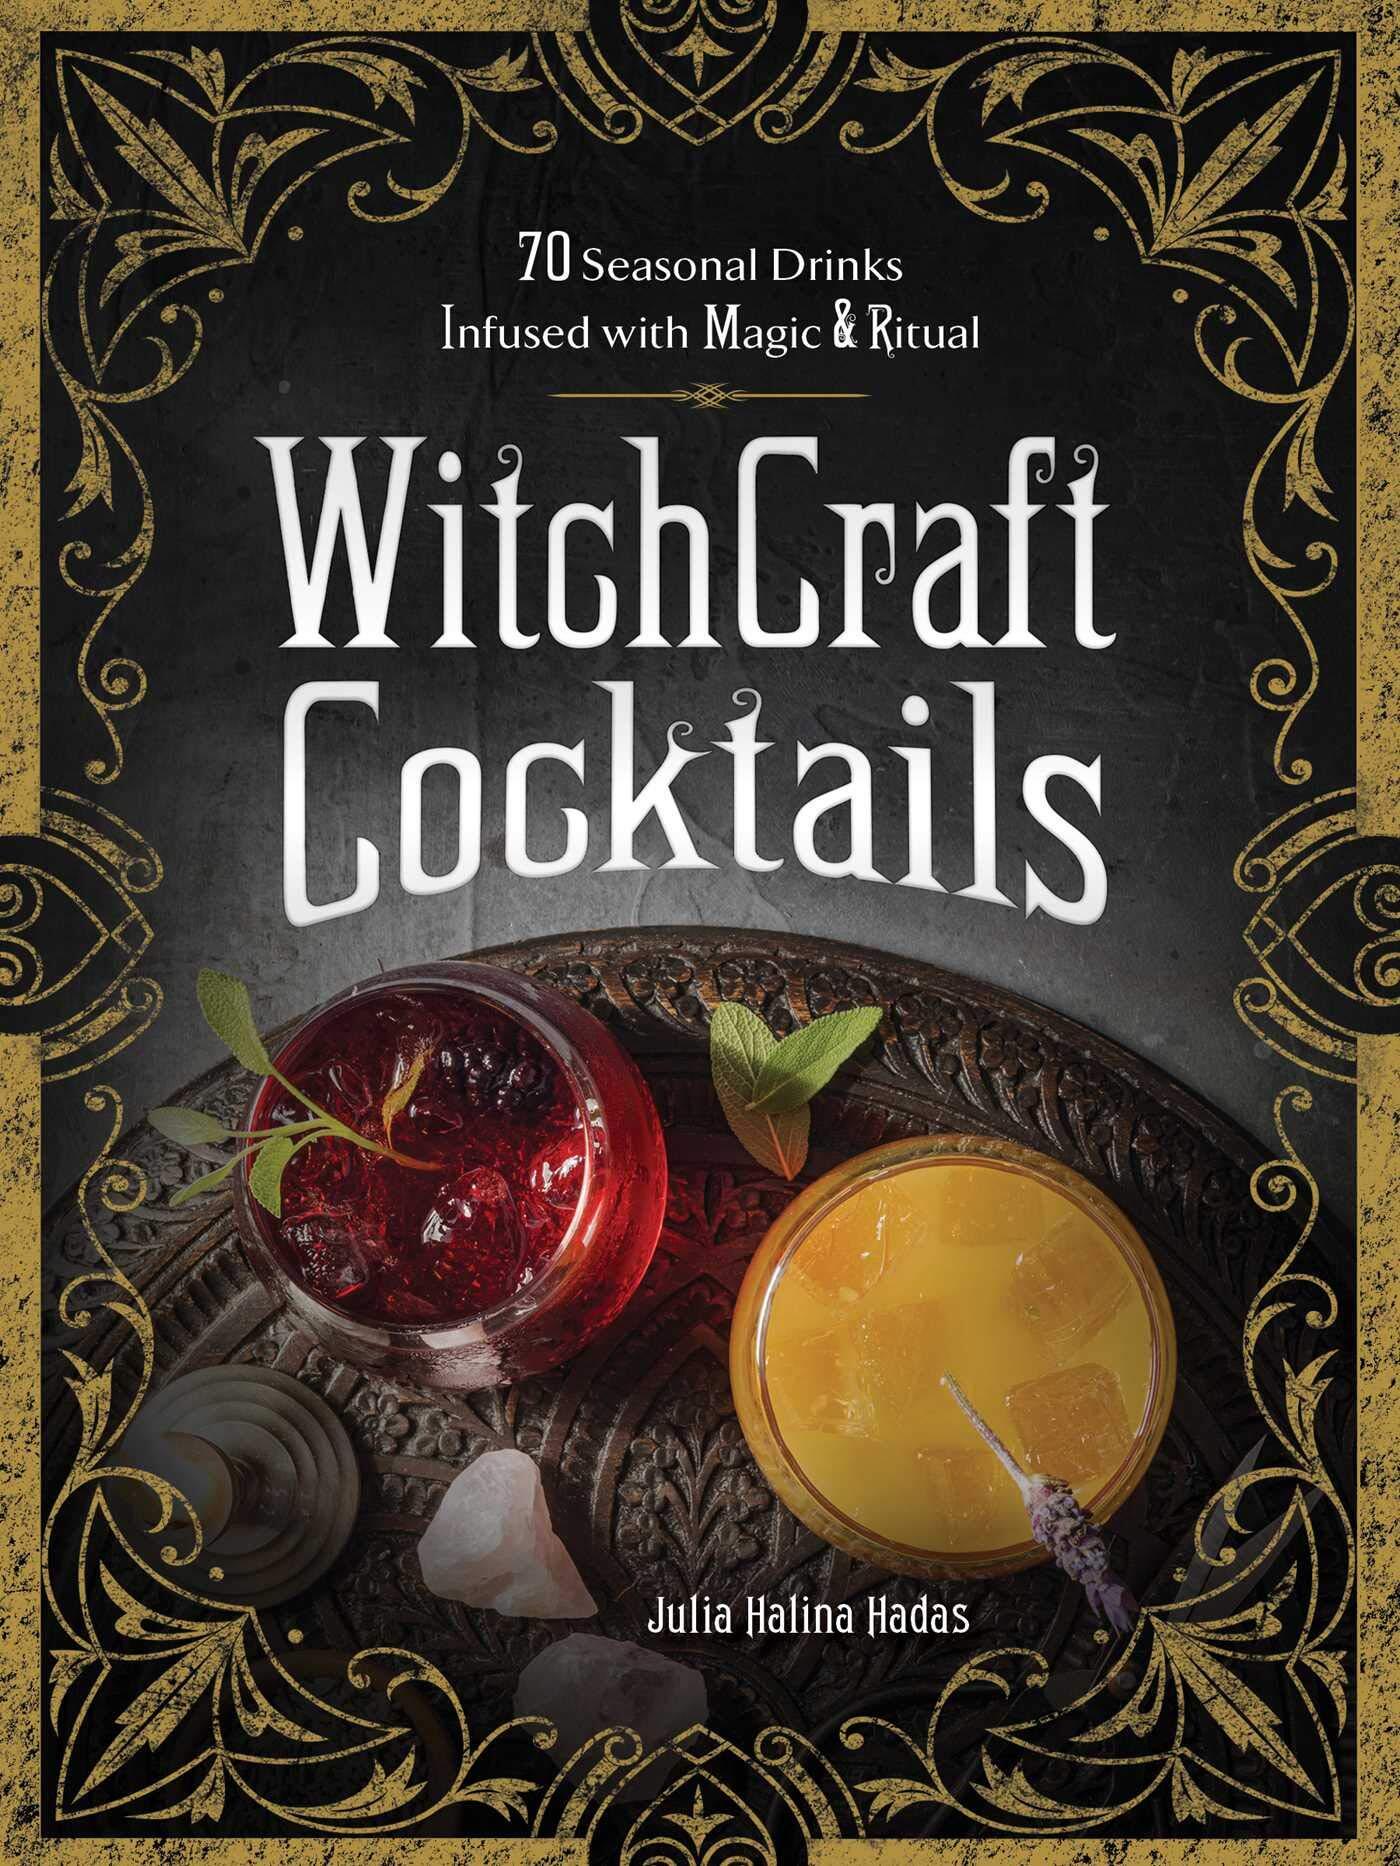 WitchCraft Cocktails: 70 Seasonal Drinks Infused with Magic & Ritual Hardcover – Illustrated